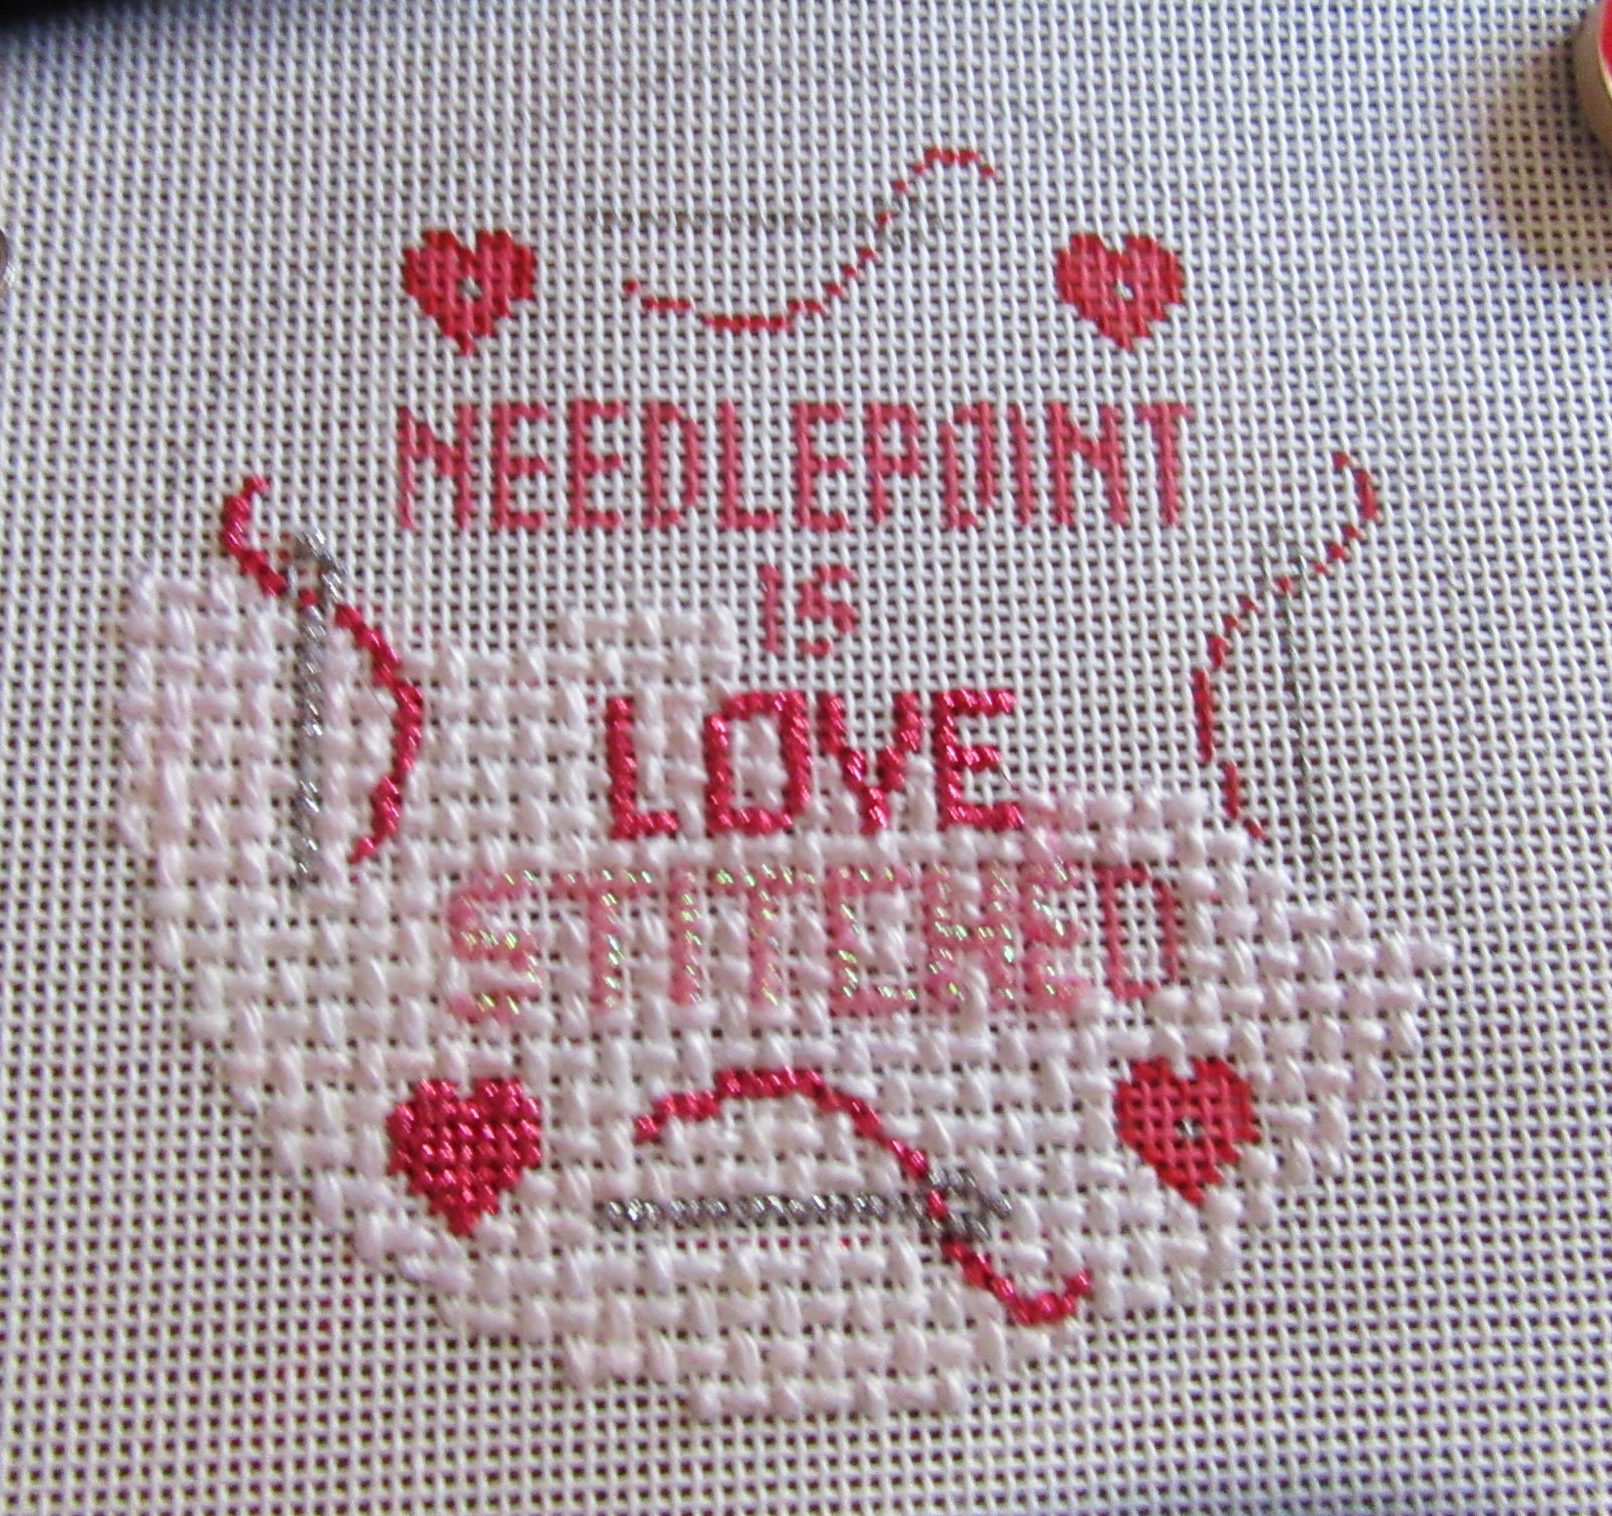 Needlepoint in Needlepoint & Embroidery 